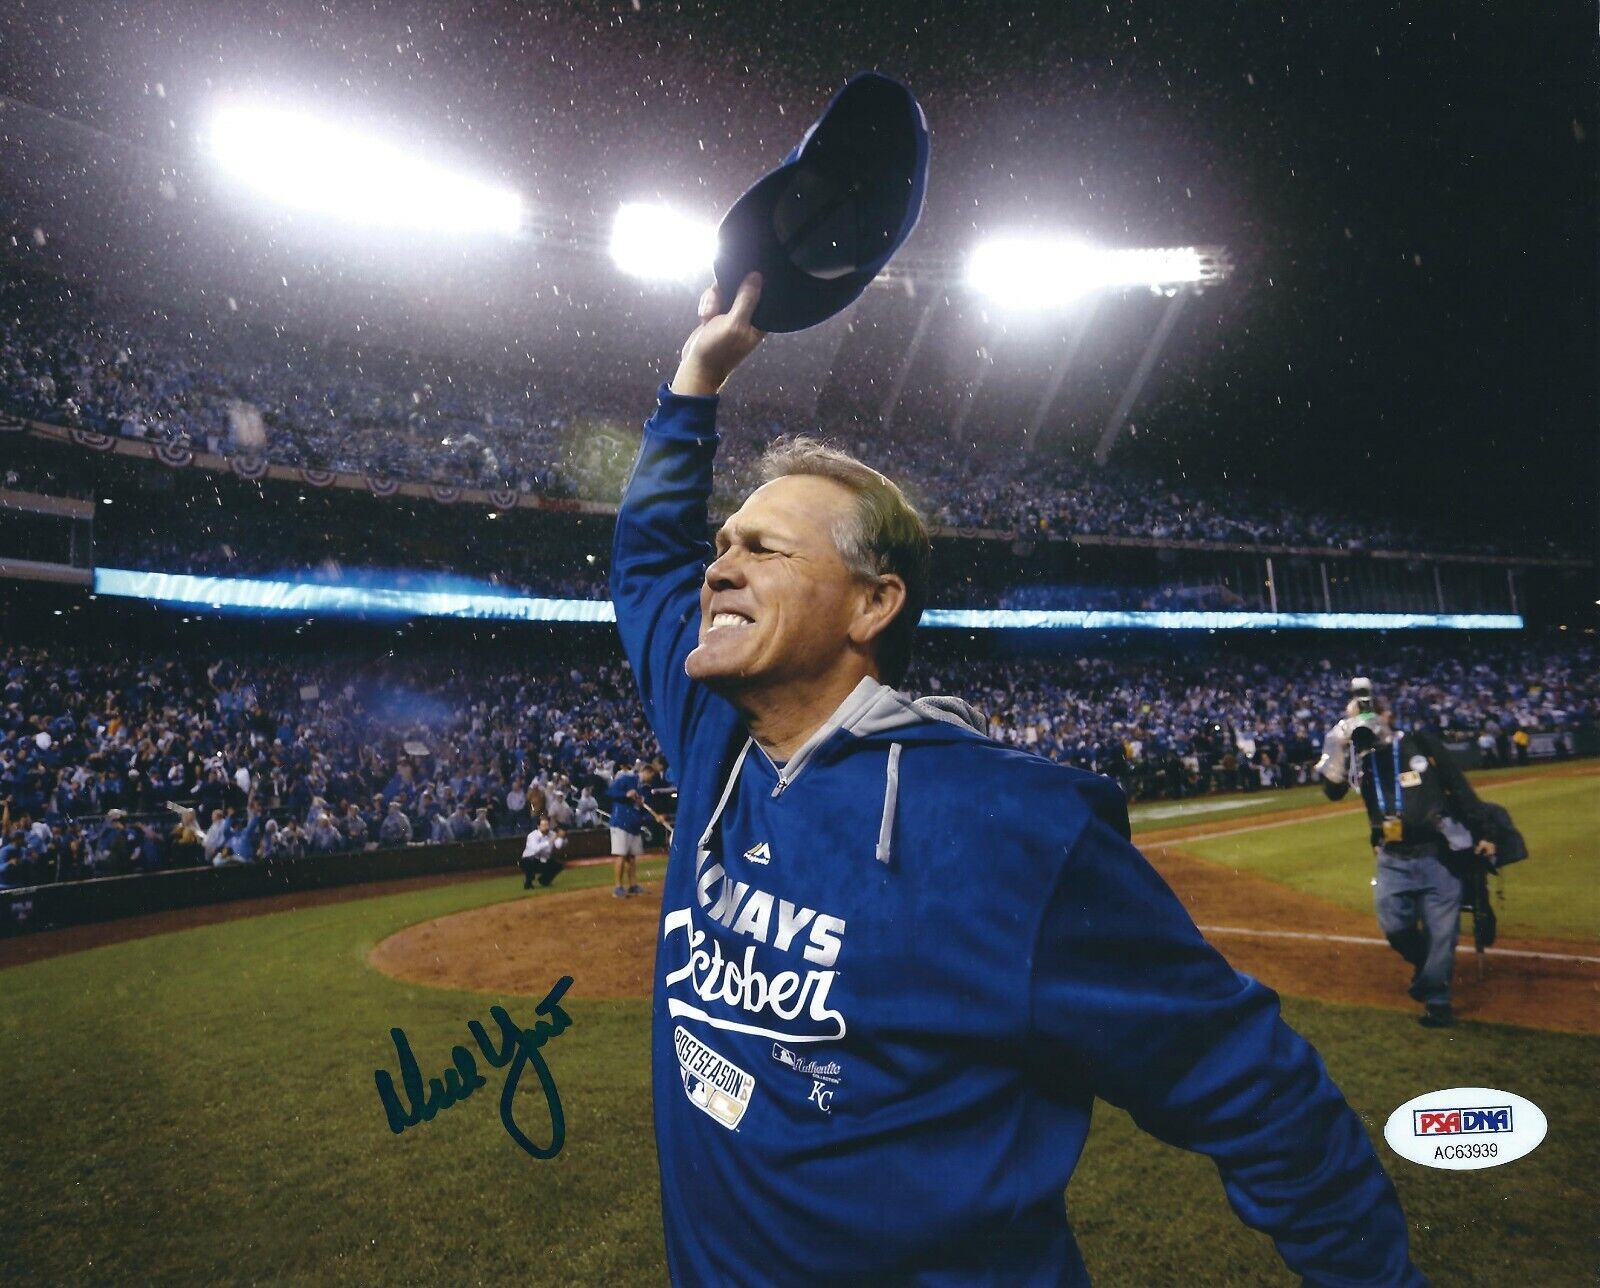 Ned Yost Signed 8x10 Photo Poster painting *Kansas City Royals WS Champ PSA AC63939